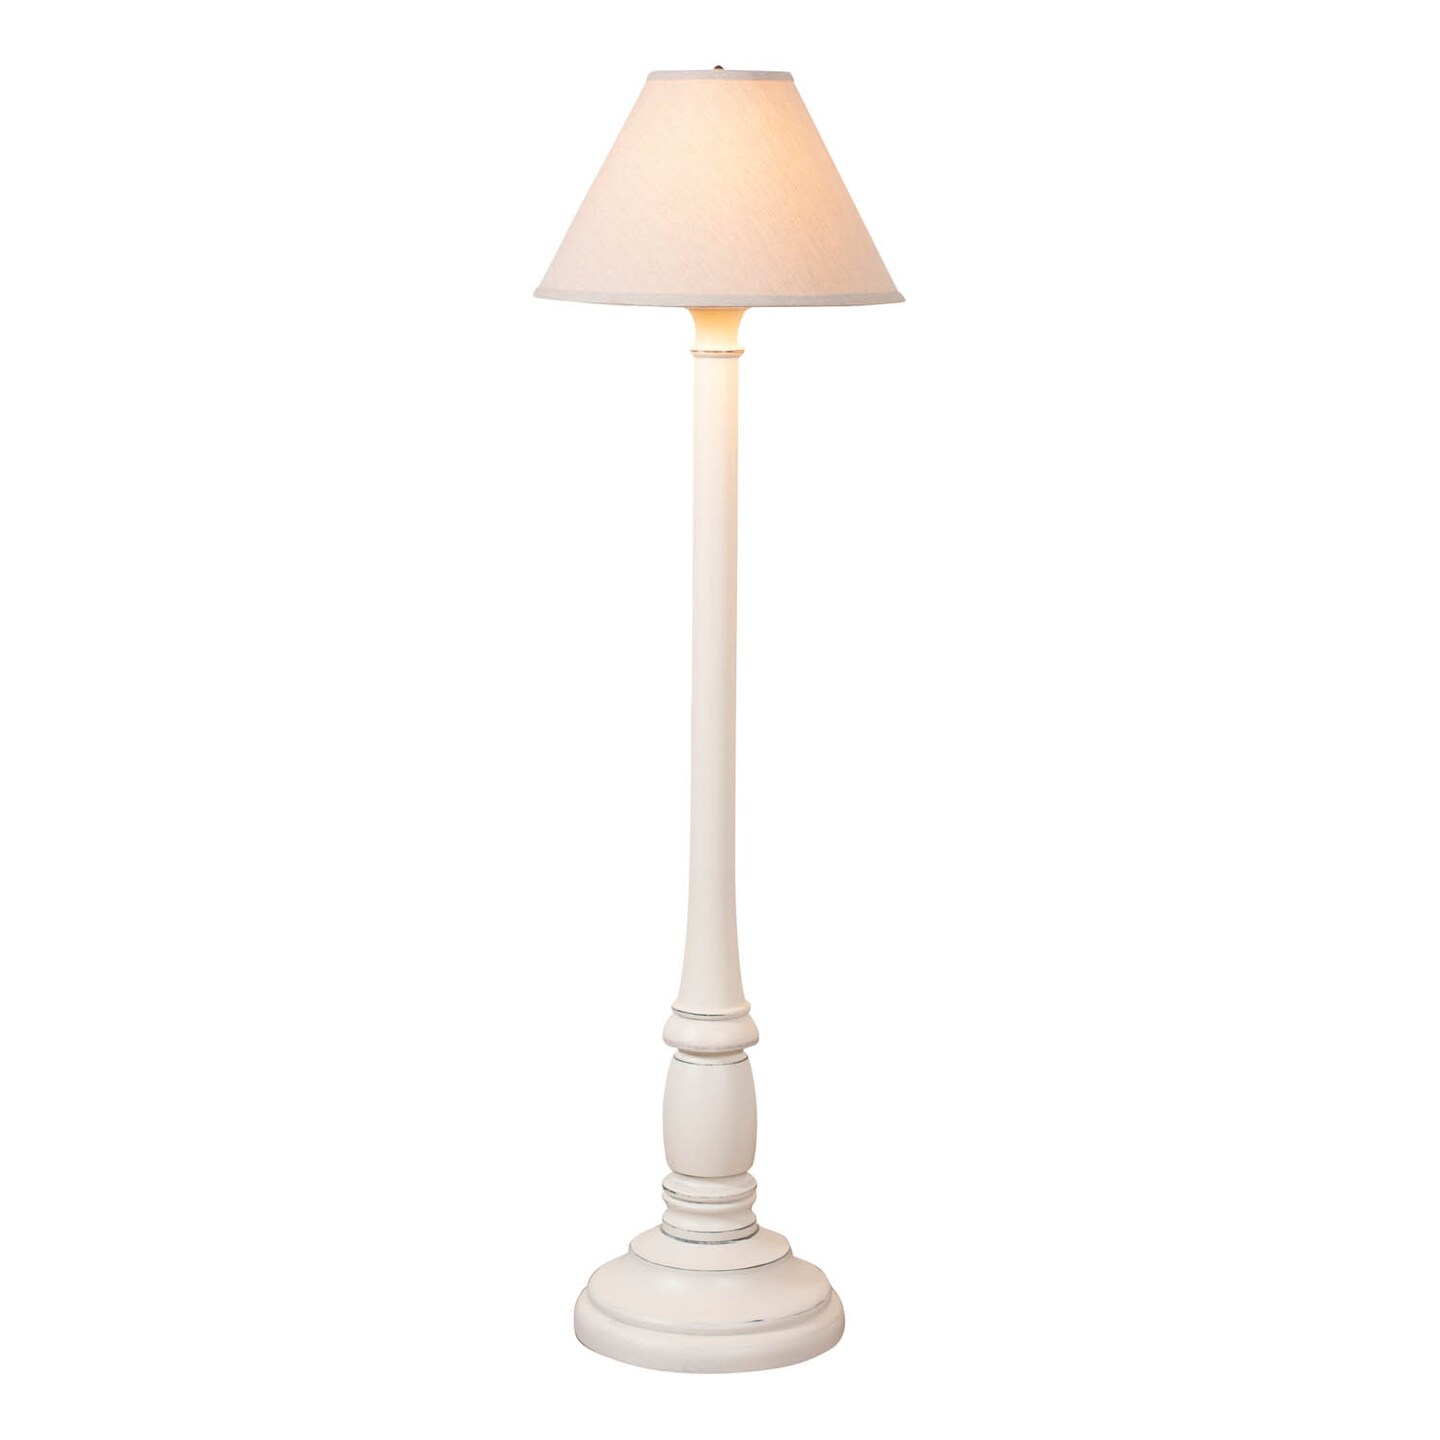 Irvins Country Tinware Brinton House Floor Lamp in Rustic White with Linen Fabric Shade